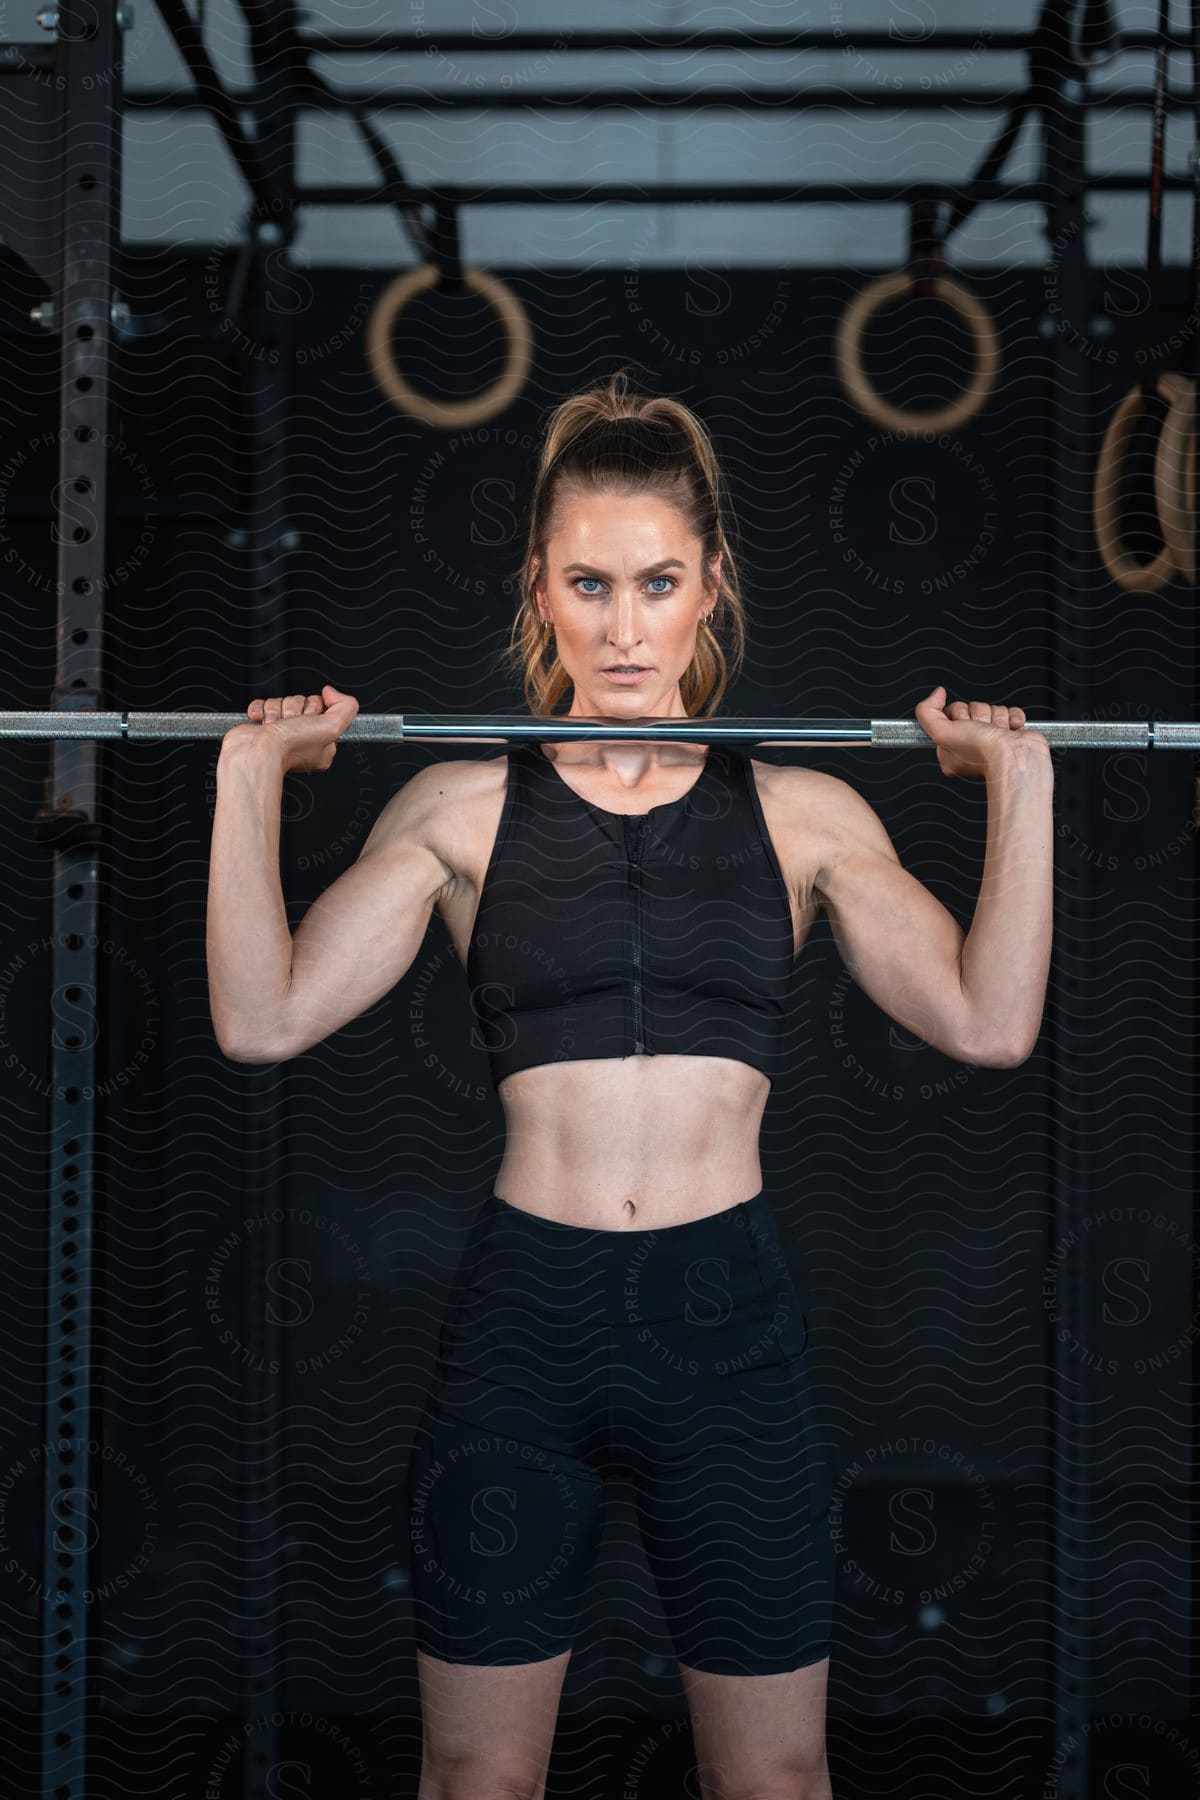 A woman holds a weight lifting bar at shoulder level while modeling fitness apparel.